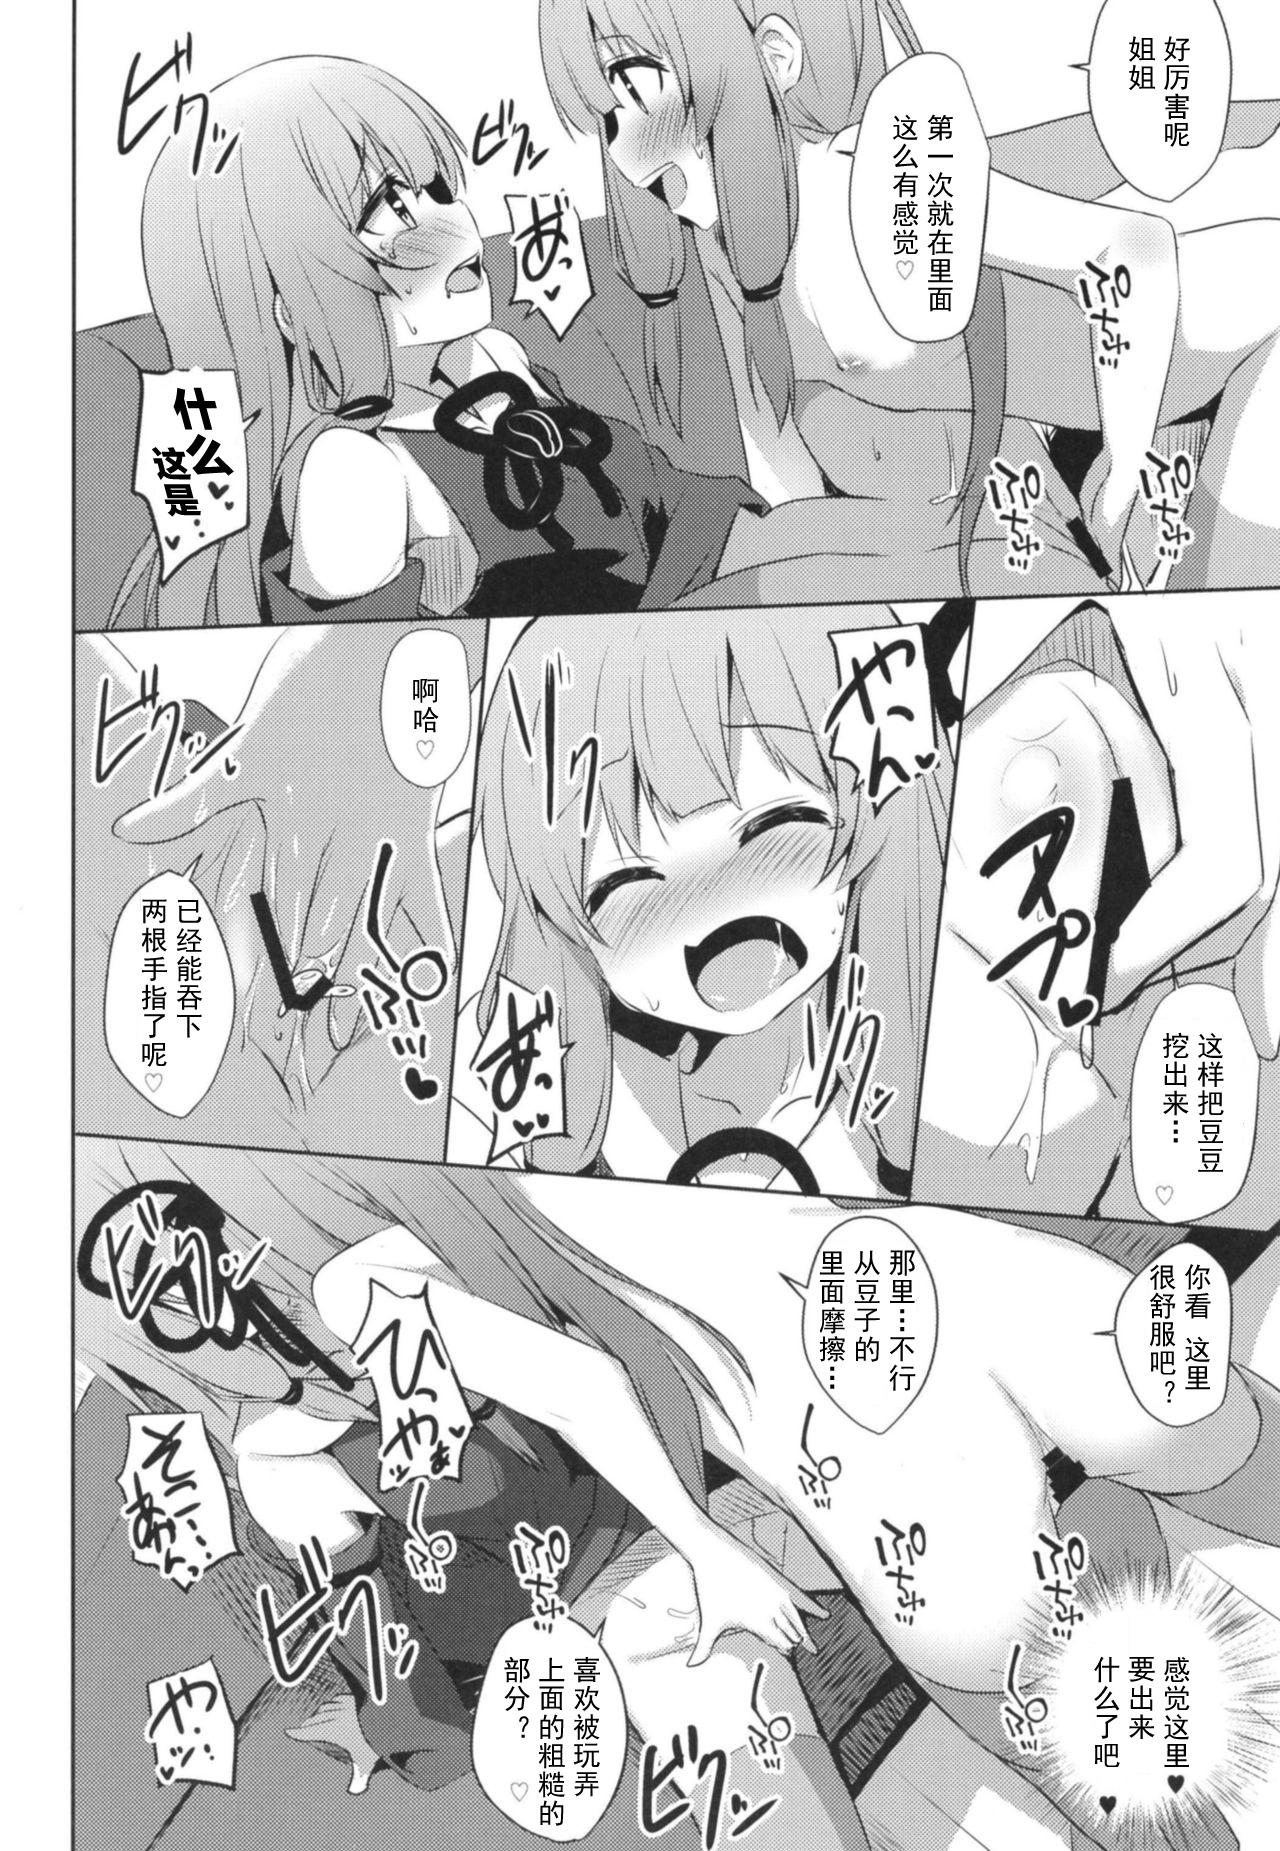 Madura [Milk Pudding (Jamcy)] Akane-chan Challenge! 4-kaime (VOICEROID) [Chinese] [古早个人汉化] [Digital] - Voiceroid China - Page 8